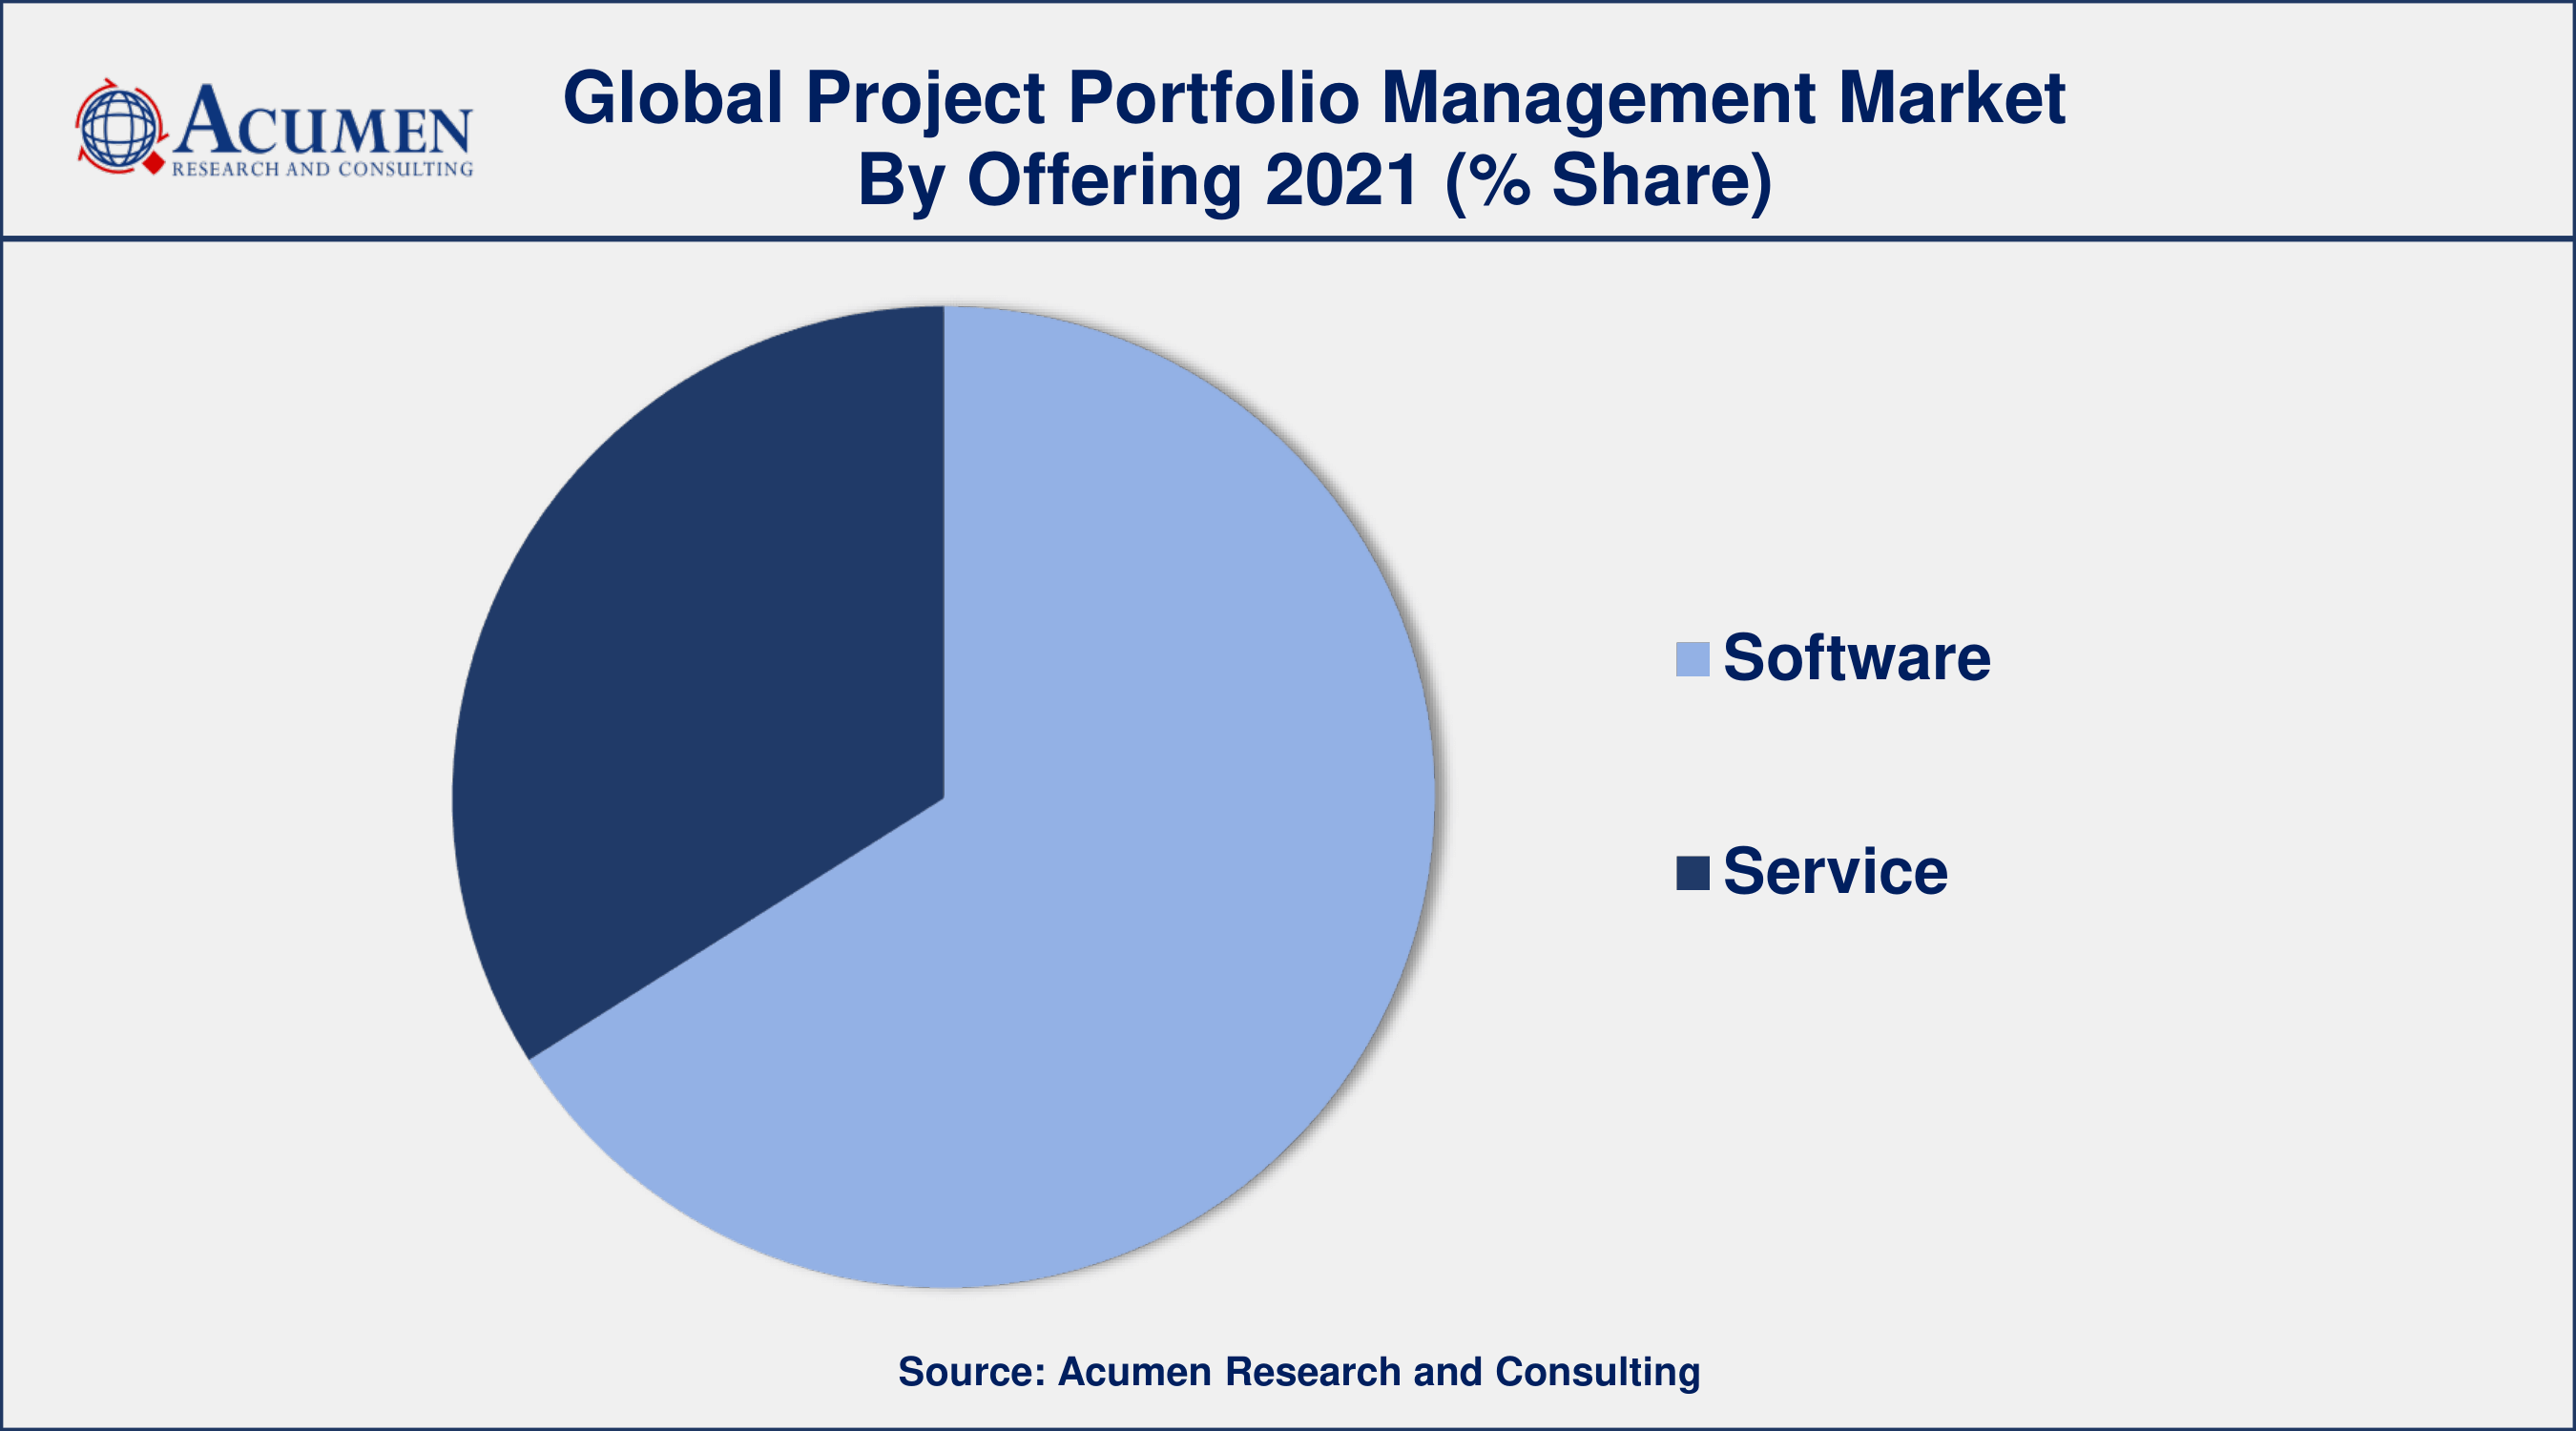 By offering, software segment generated about 68% market share in 2021